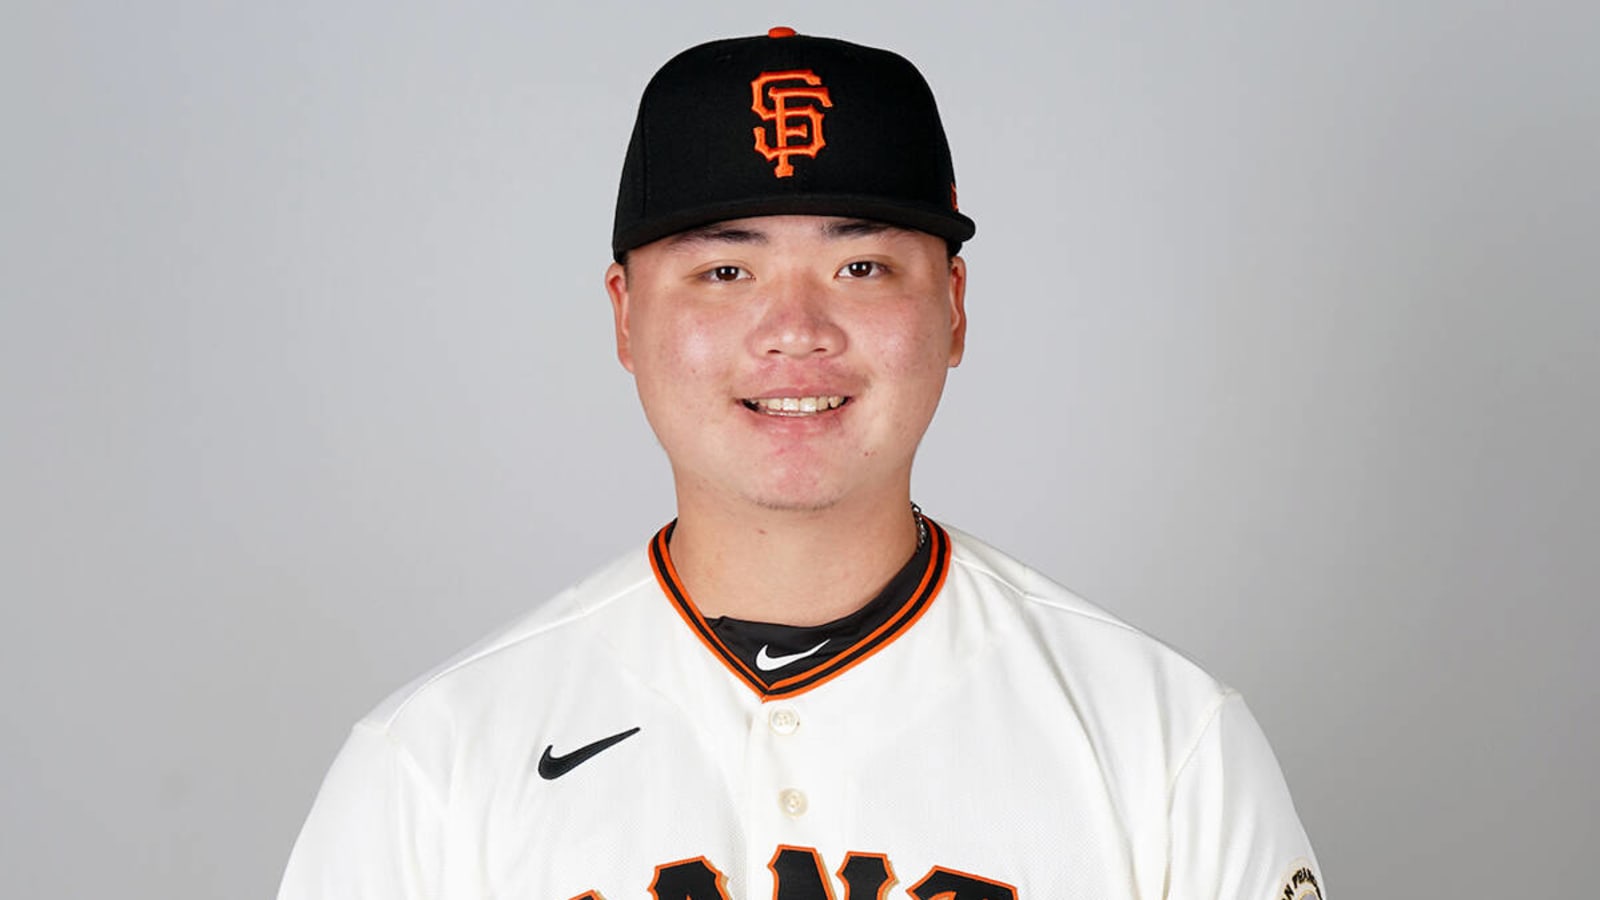 Giants recall pitcher with intriguing strikeout potential